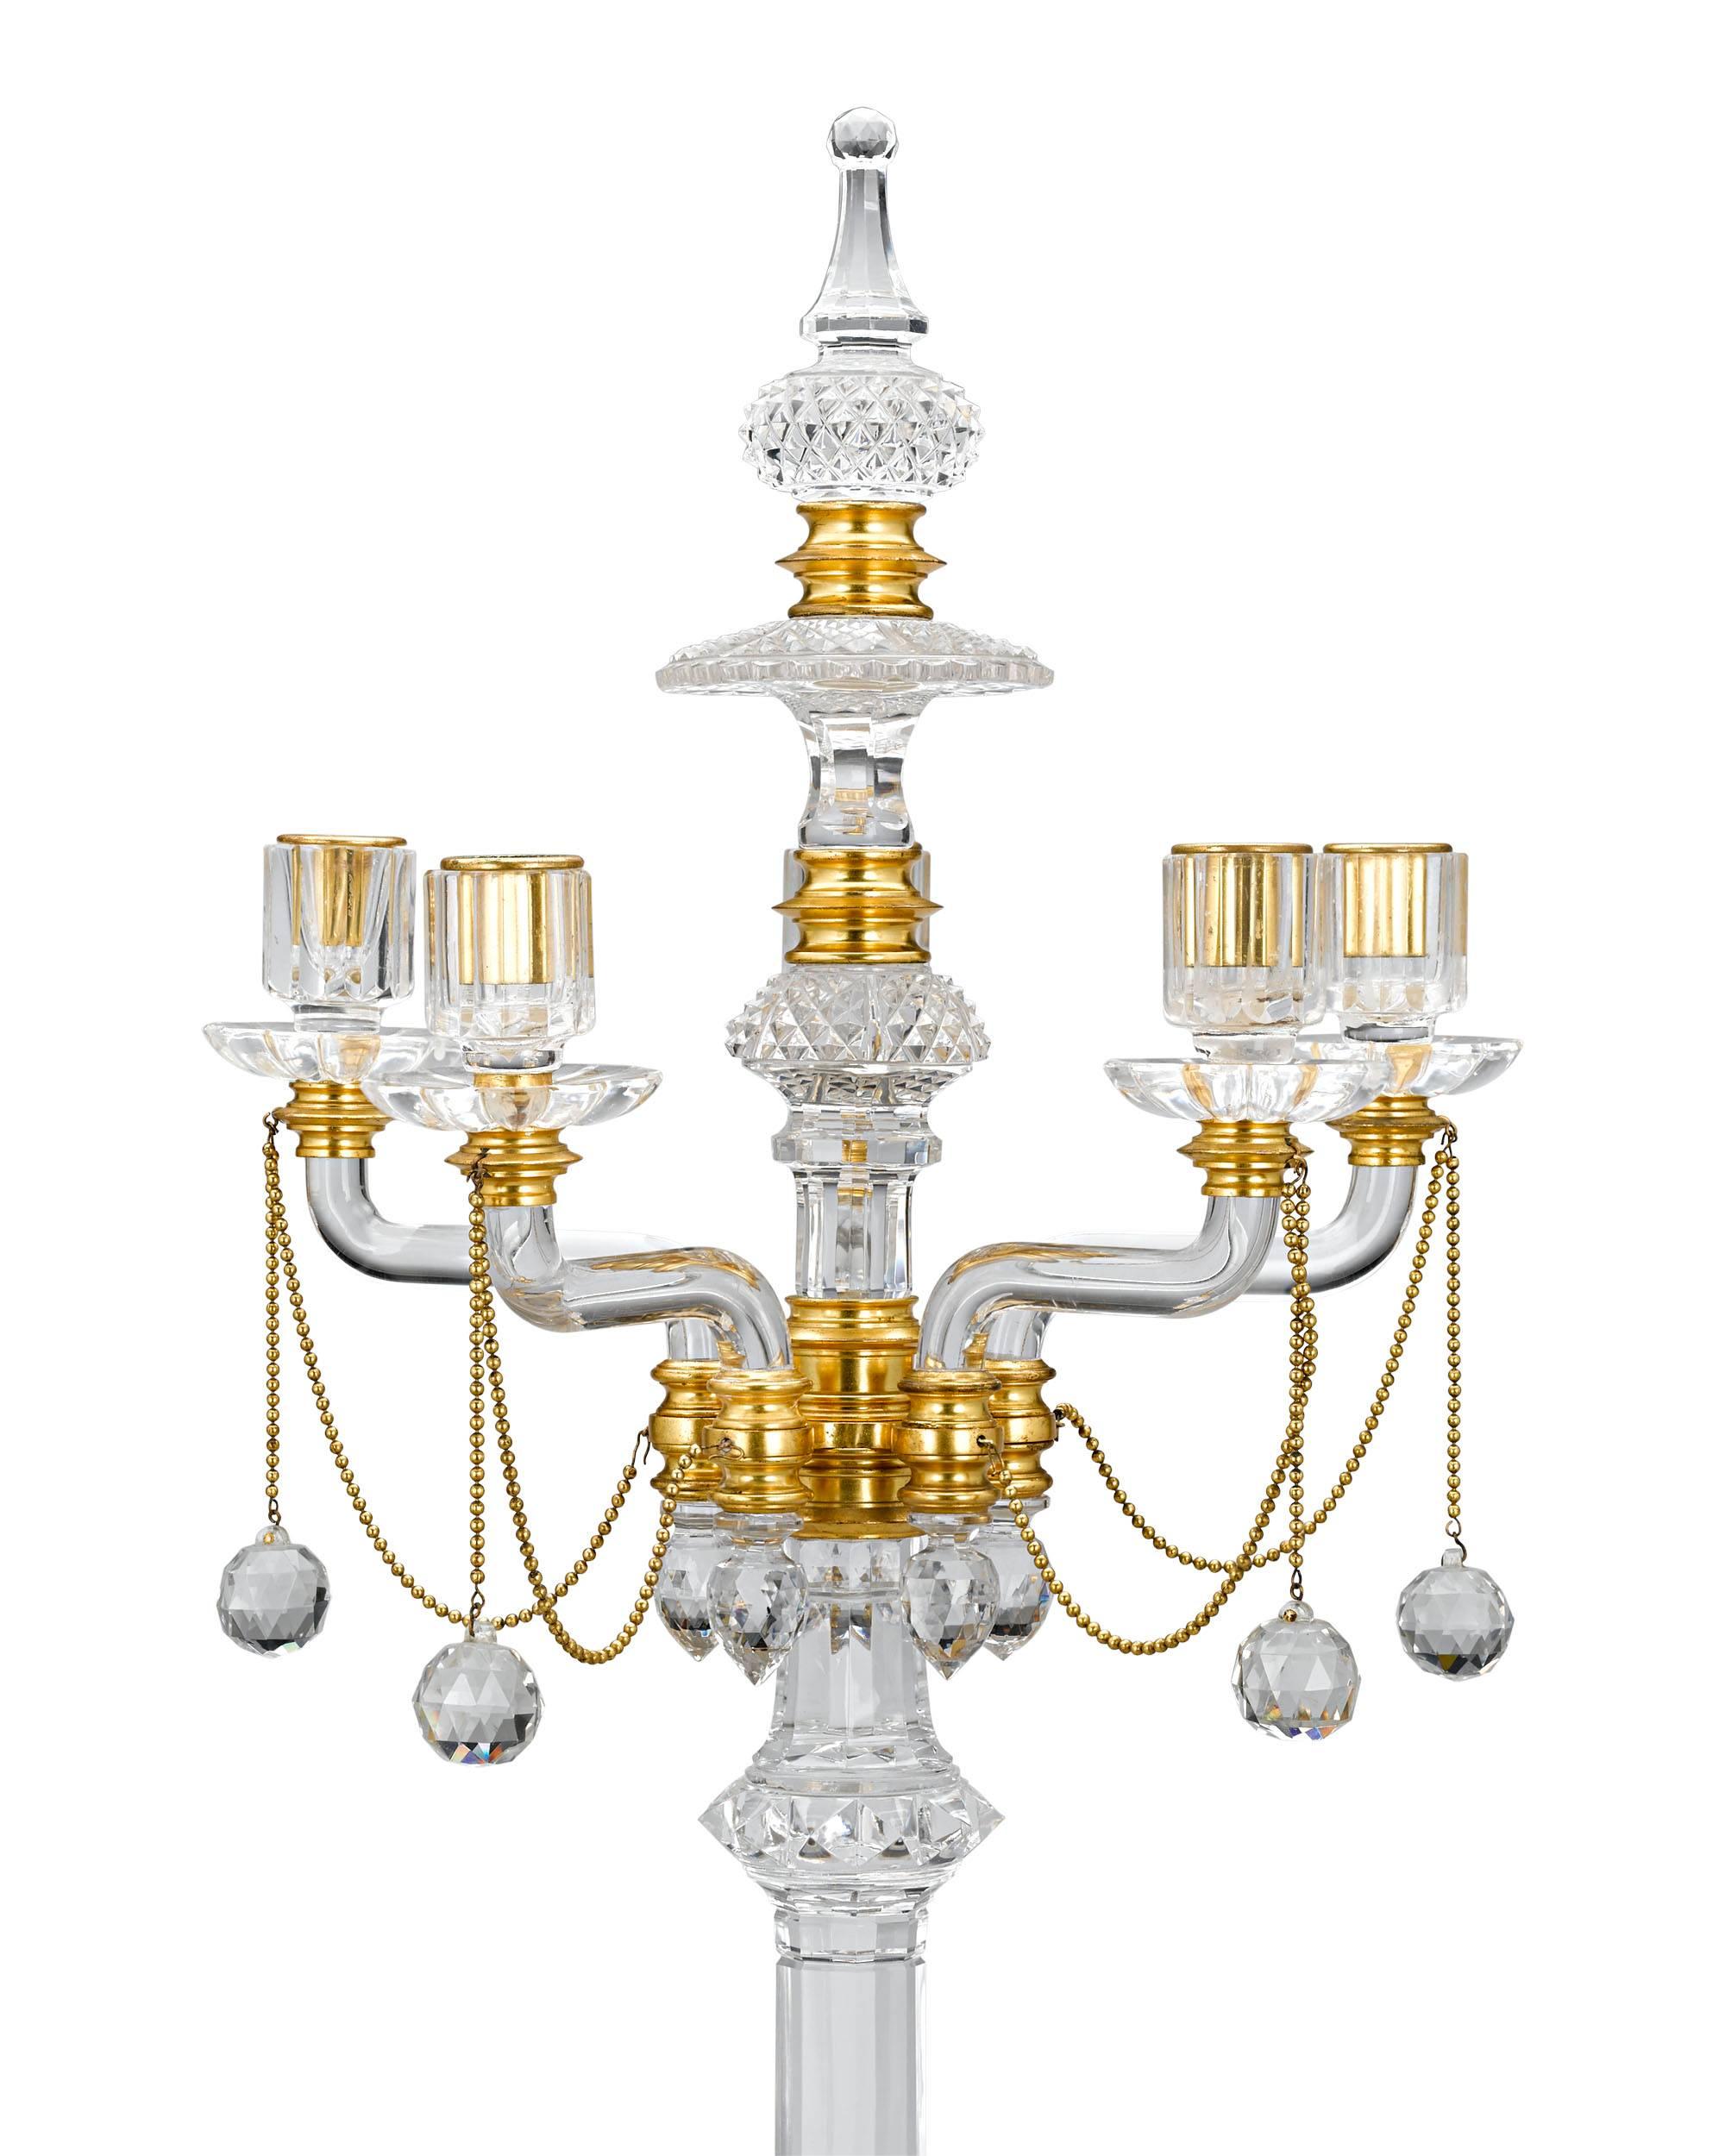 This extraordinary pair of cut-glass and gilt bronze five-light candelabra was crafted by the celebrated crystal works of F. & C. Osler. The English firm was the largest and grandest manufacturer of glass in Victorian Britain, producing some of the